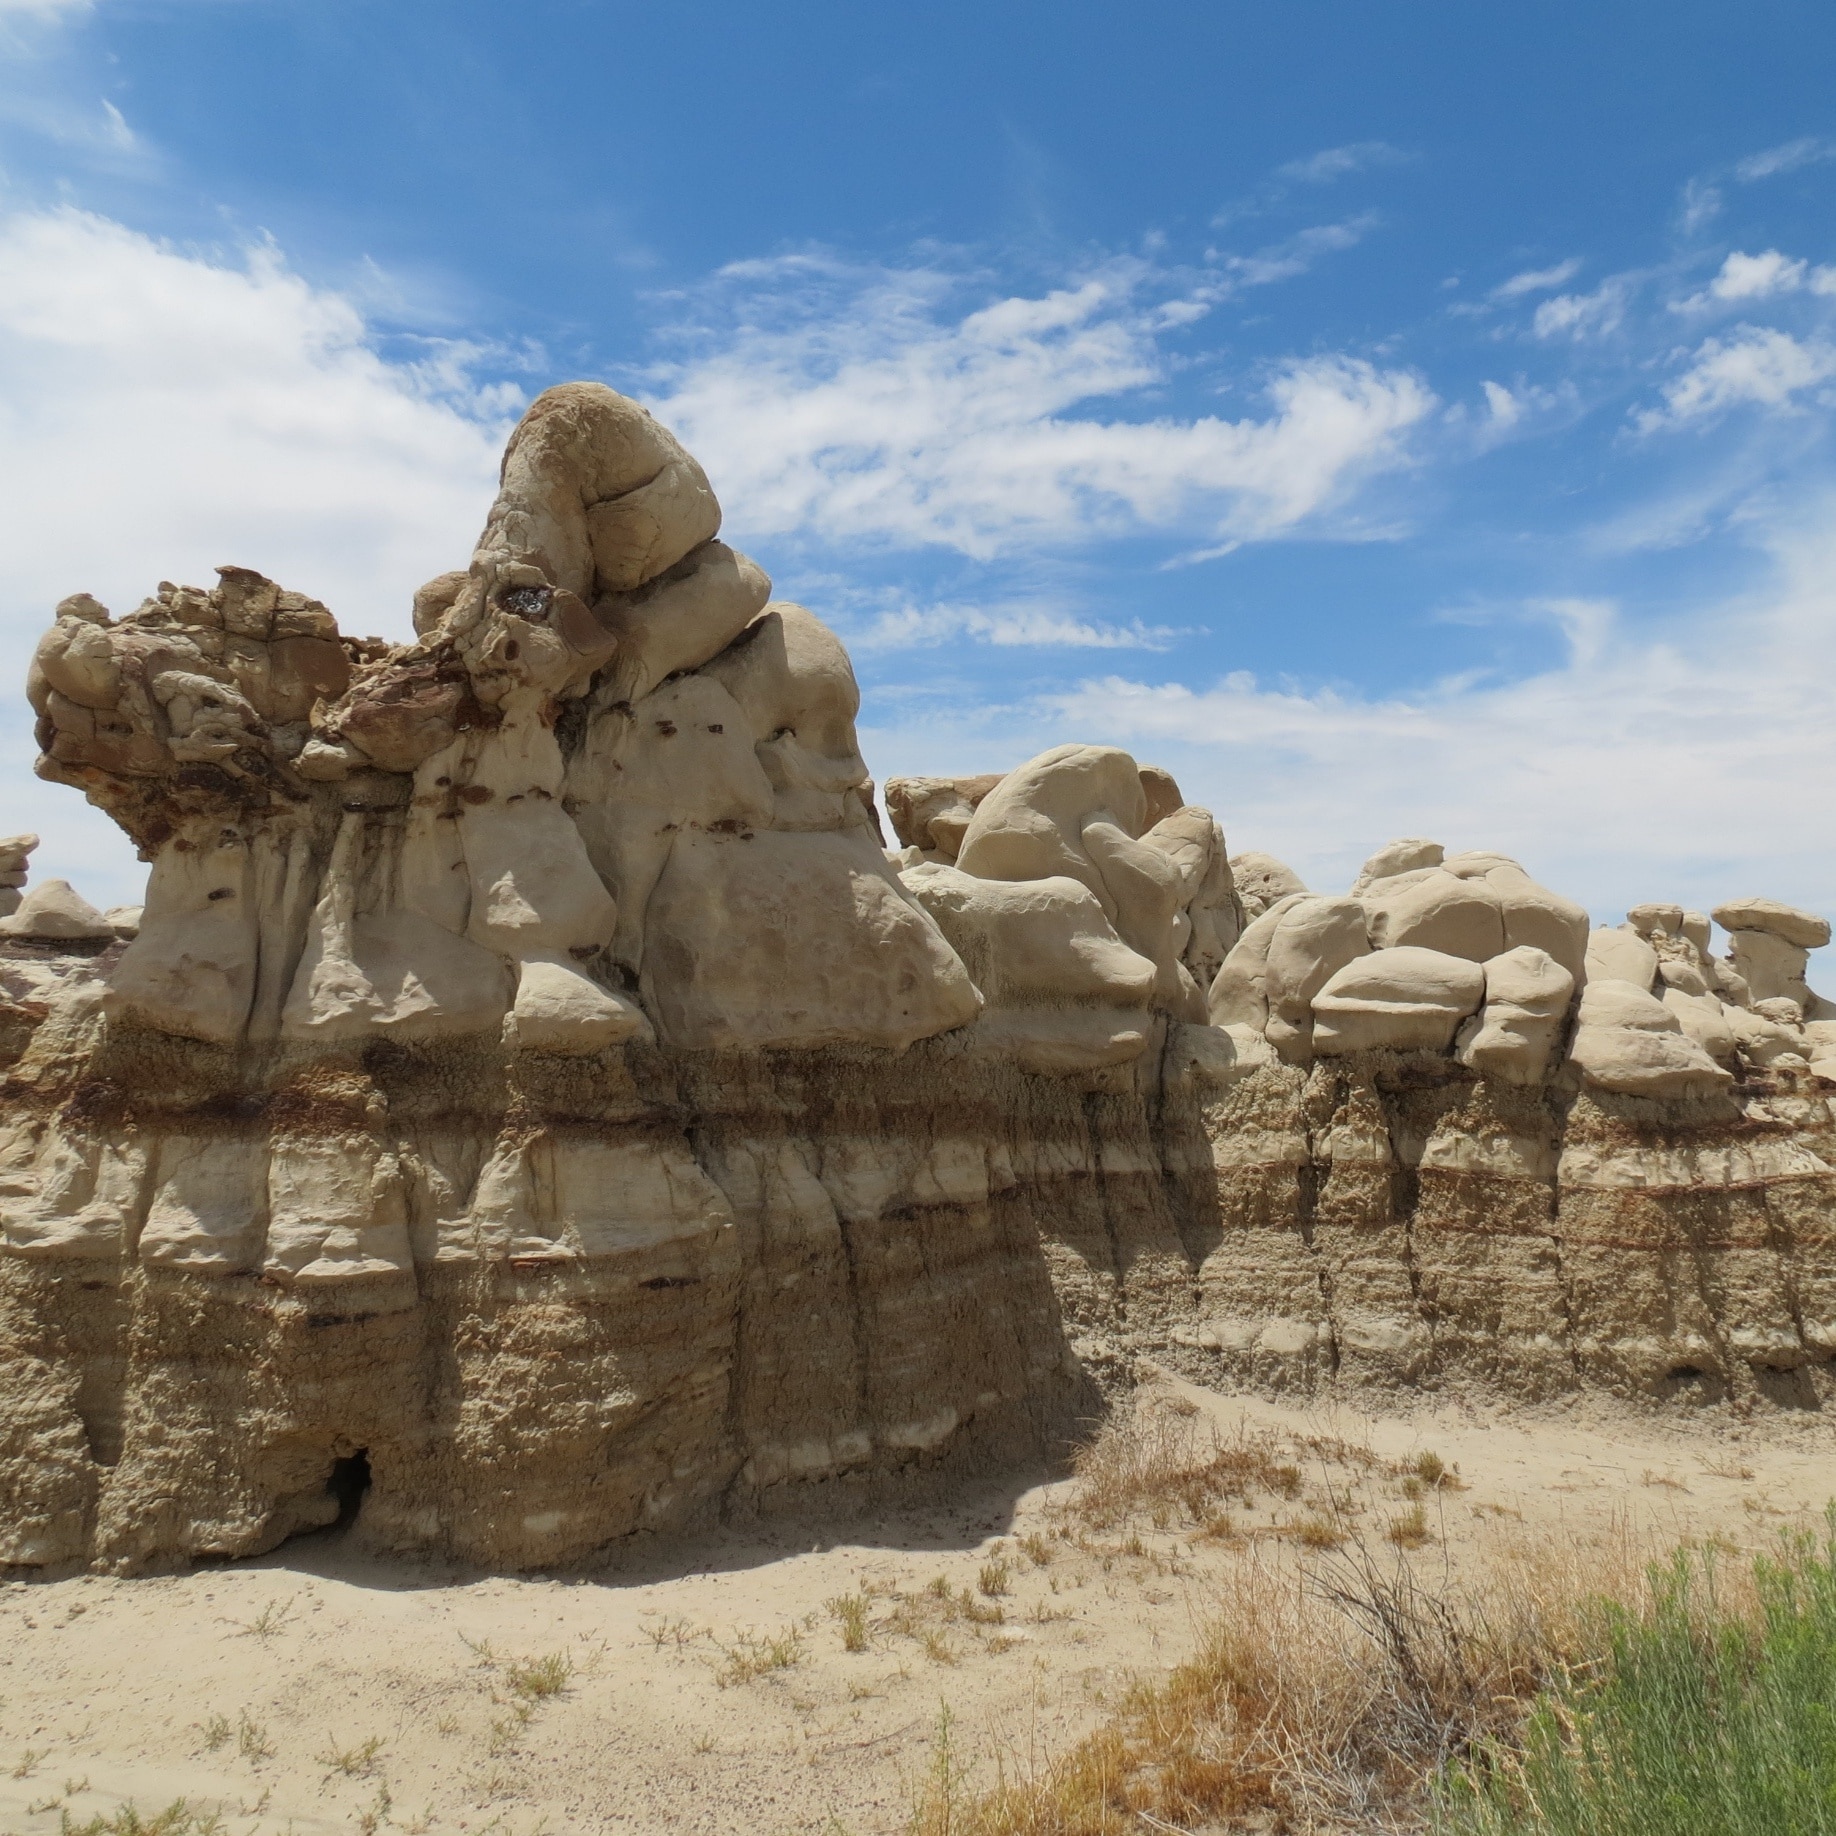 About an hour outside of Farmington, NM, the Bisti Wilderness is truly a unique experience. It's like the Badlands came to the SW of the US, just getting all the more bizarre in the move. You will literally feel like you are on a different planet as you hike around the park. #hiking